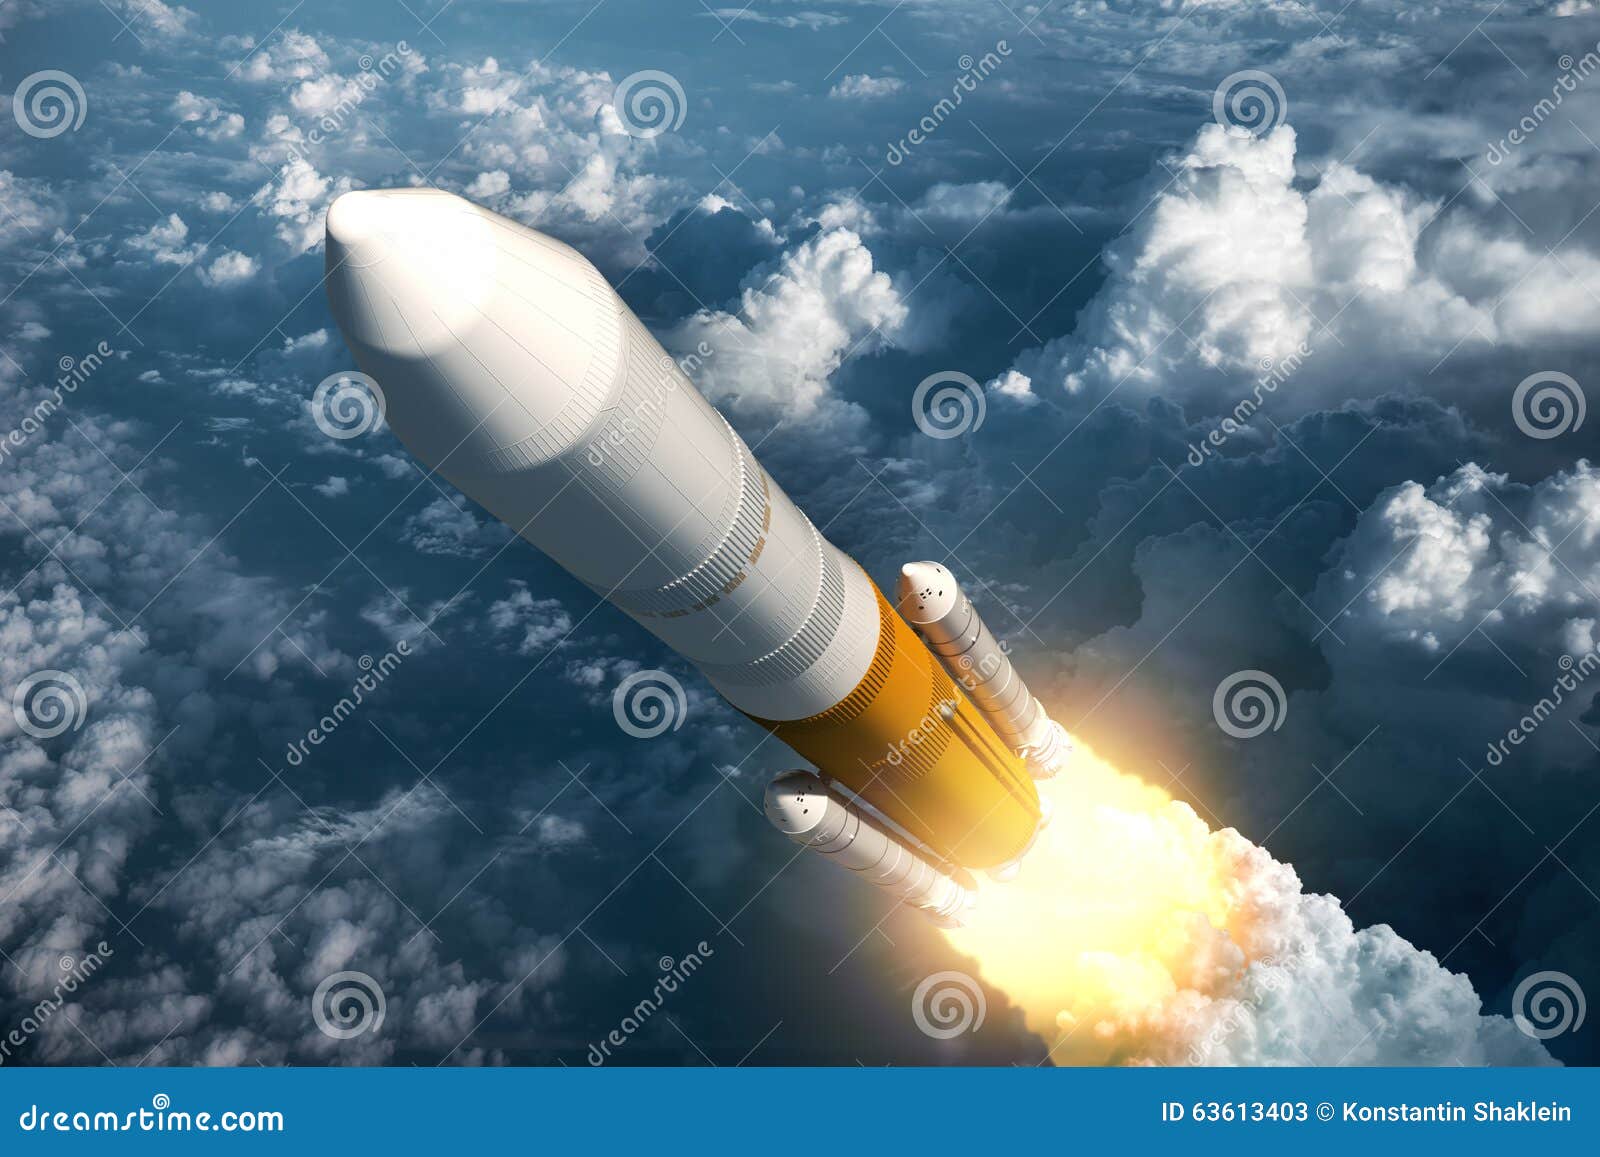 cargo launch rocket takes off